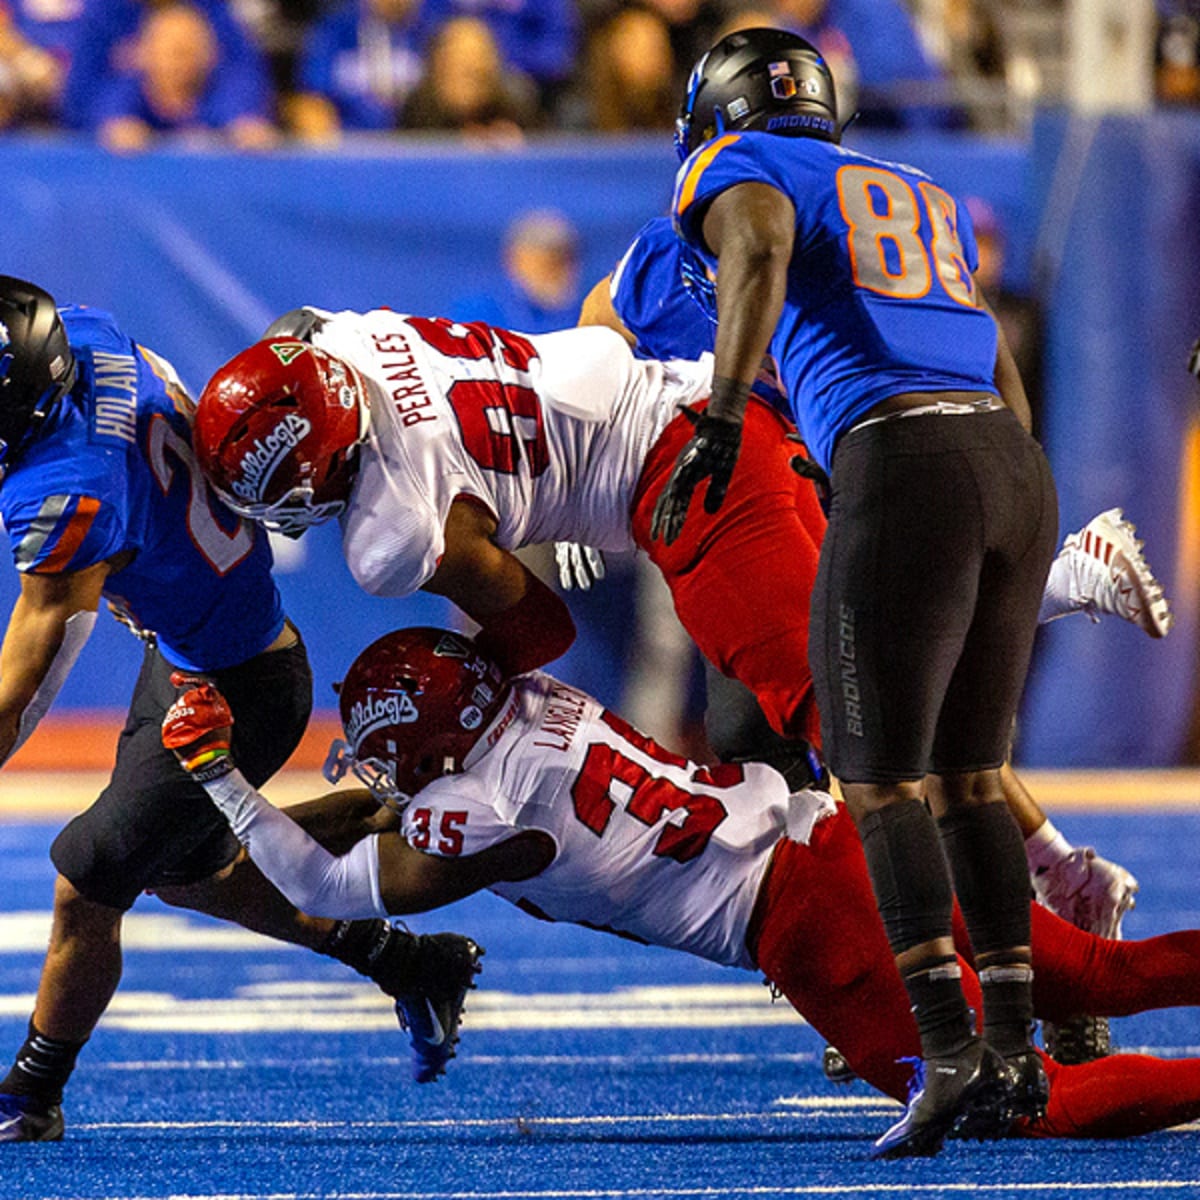 Fresno State beats Boise State for 2022 Mountain West title